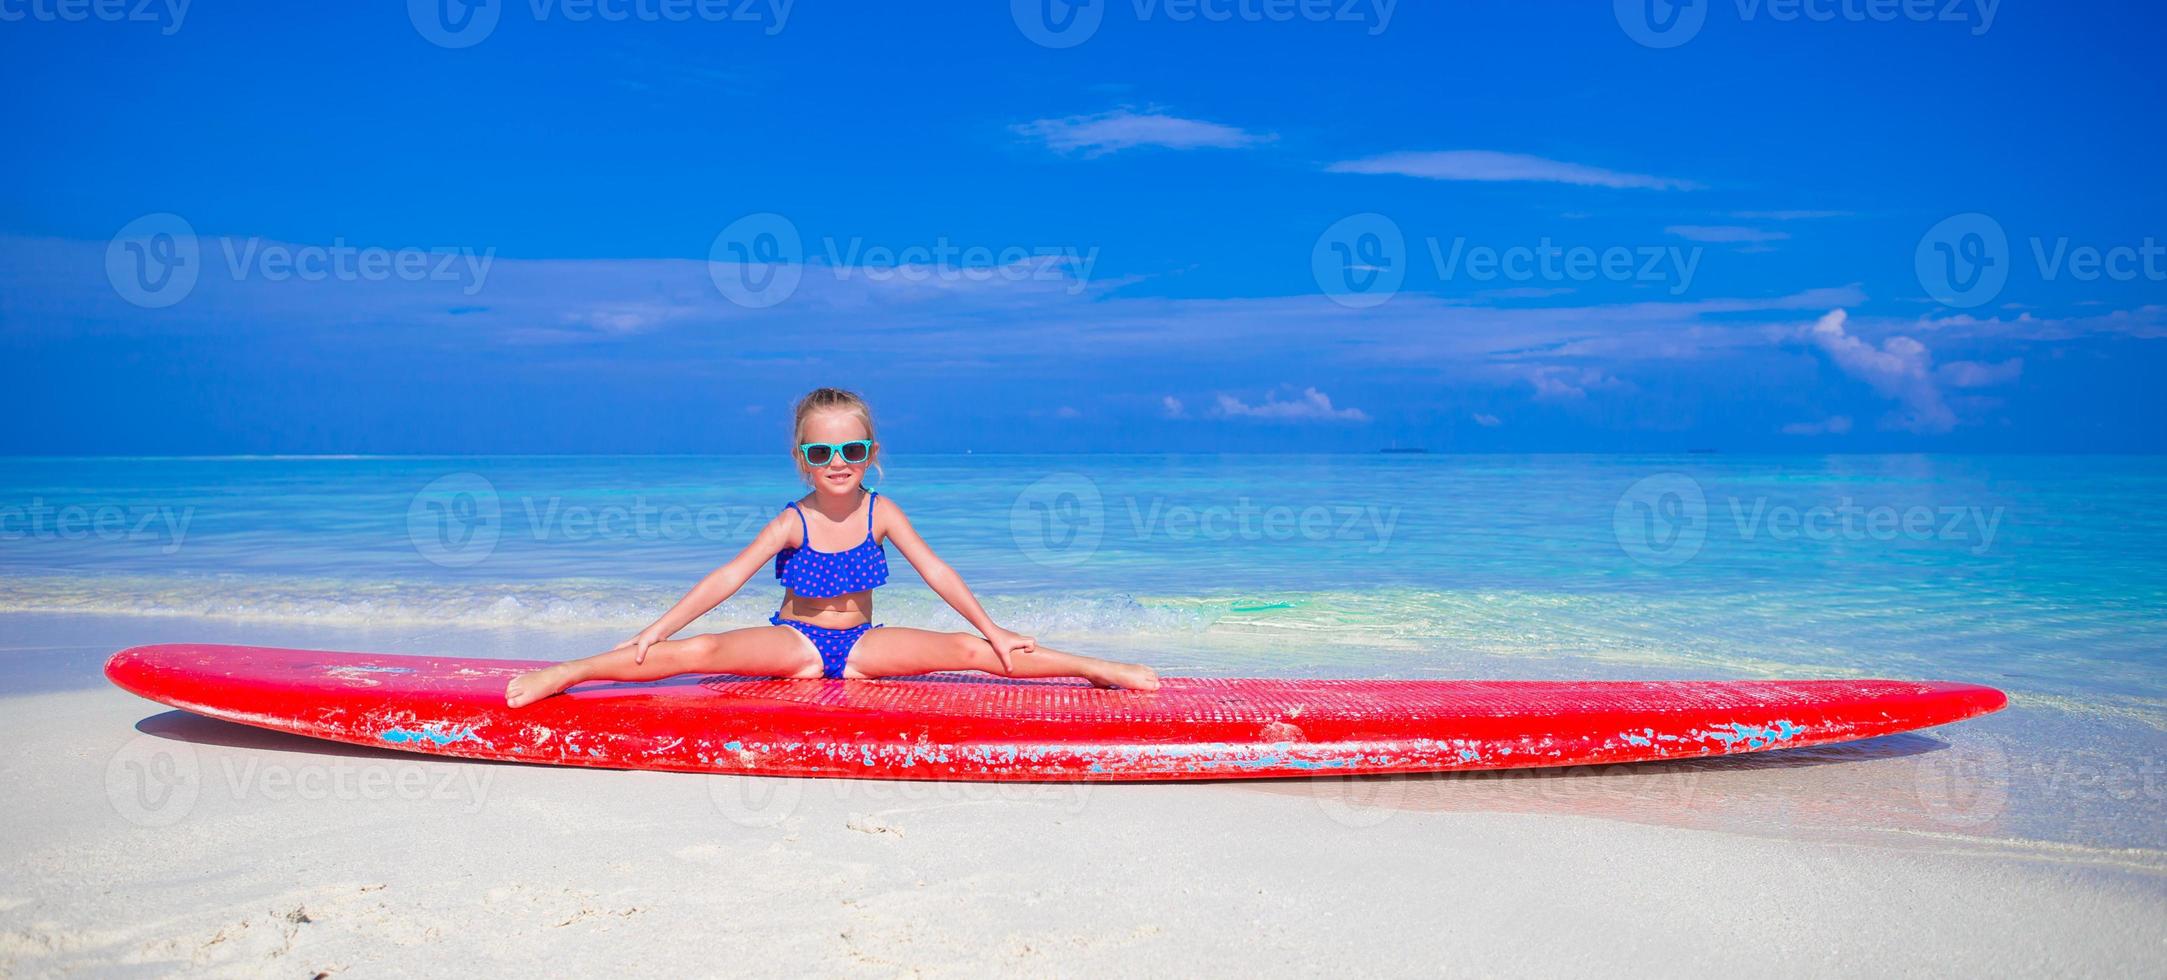 Little adorable girl on a surfboard in the turquoise sea photo